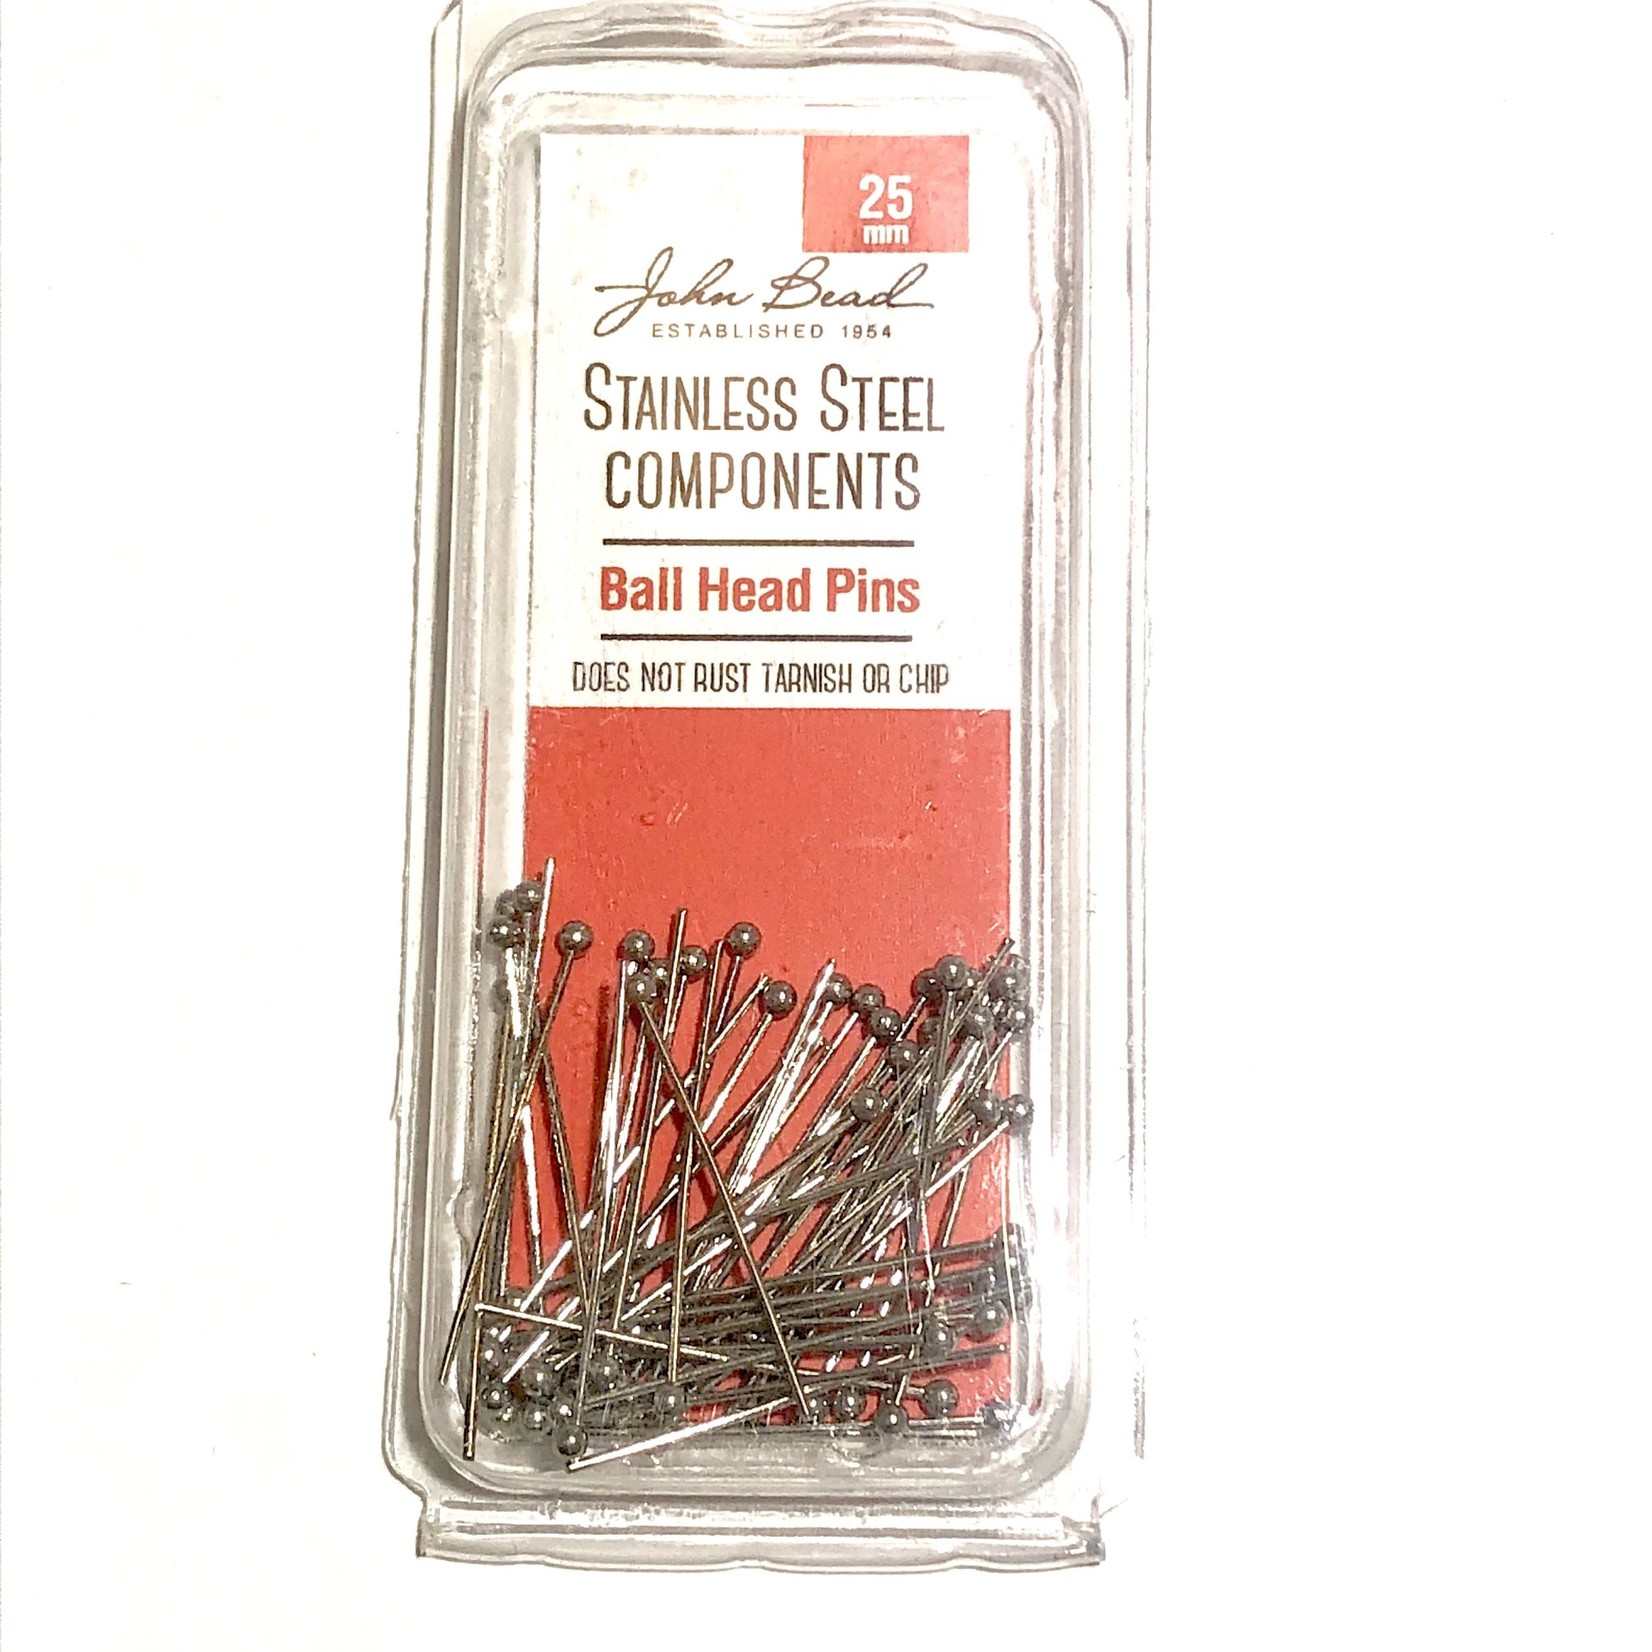 Stainless Steel Ball Head Pins 25mm 50pcs